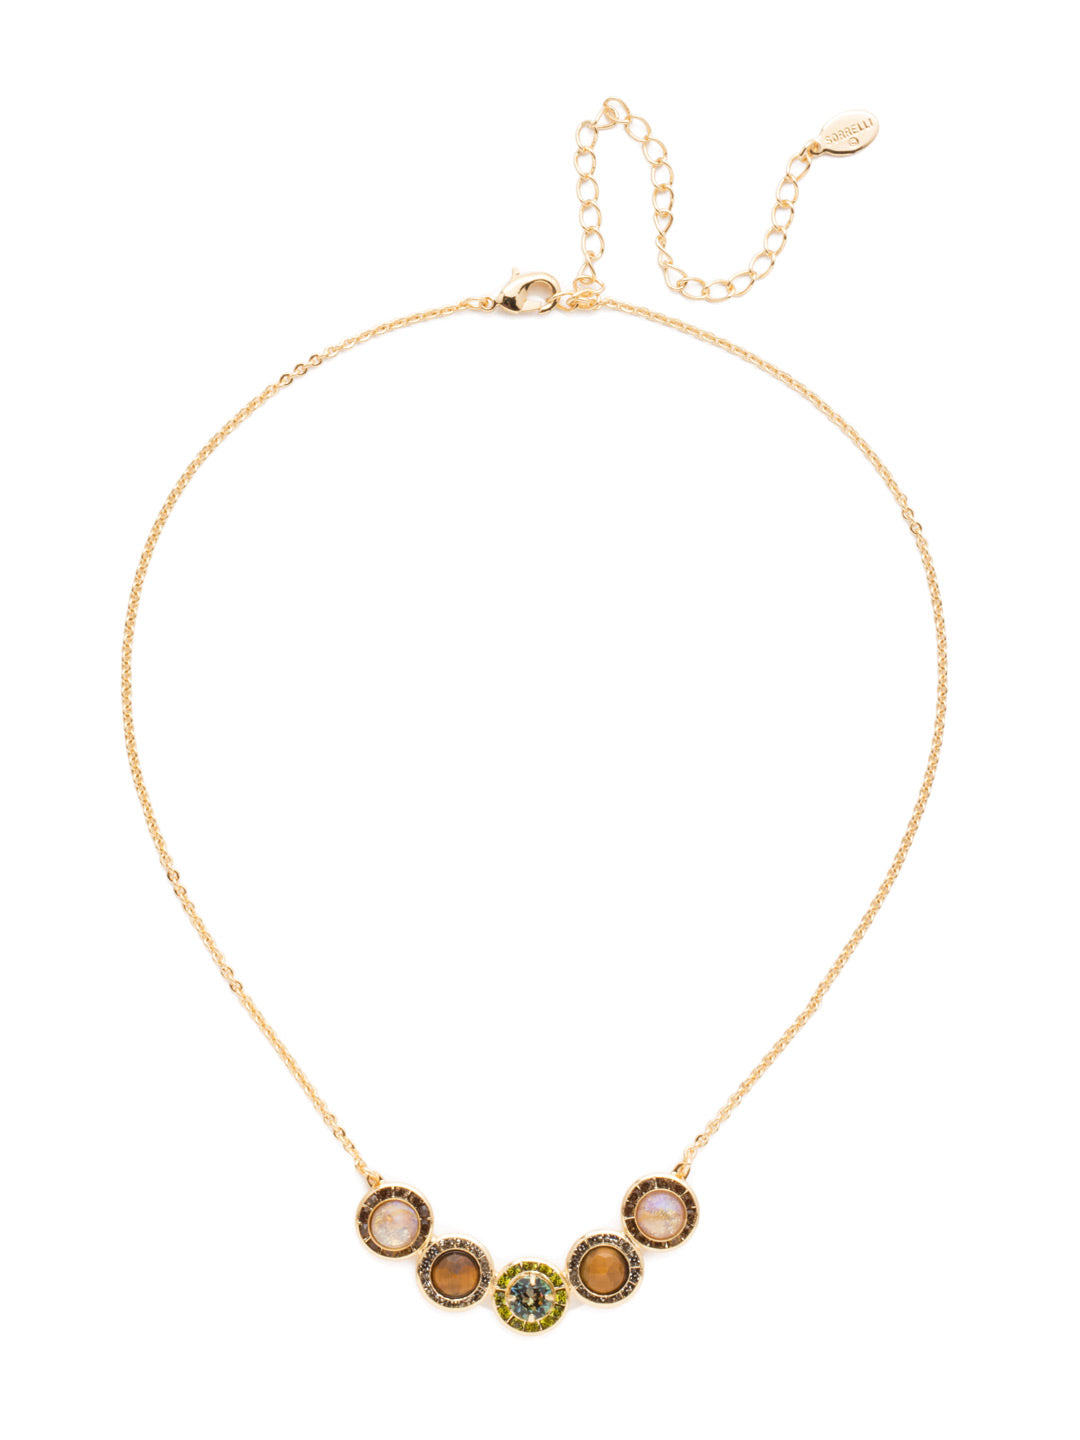 Saylor Tennis Necklace - NET14BGCSM - The Saylor Tennis Necklace features a delicate chain centered with a set of sparkling circular crystal stones that shine bright. From Sorrelli's Cashmere collection in our Bright Gold-tone finish.